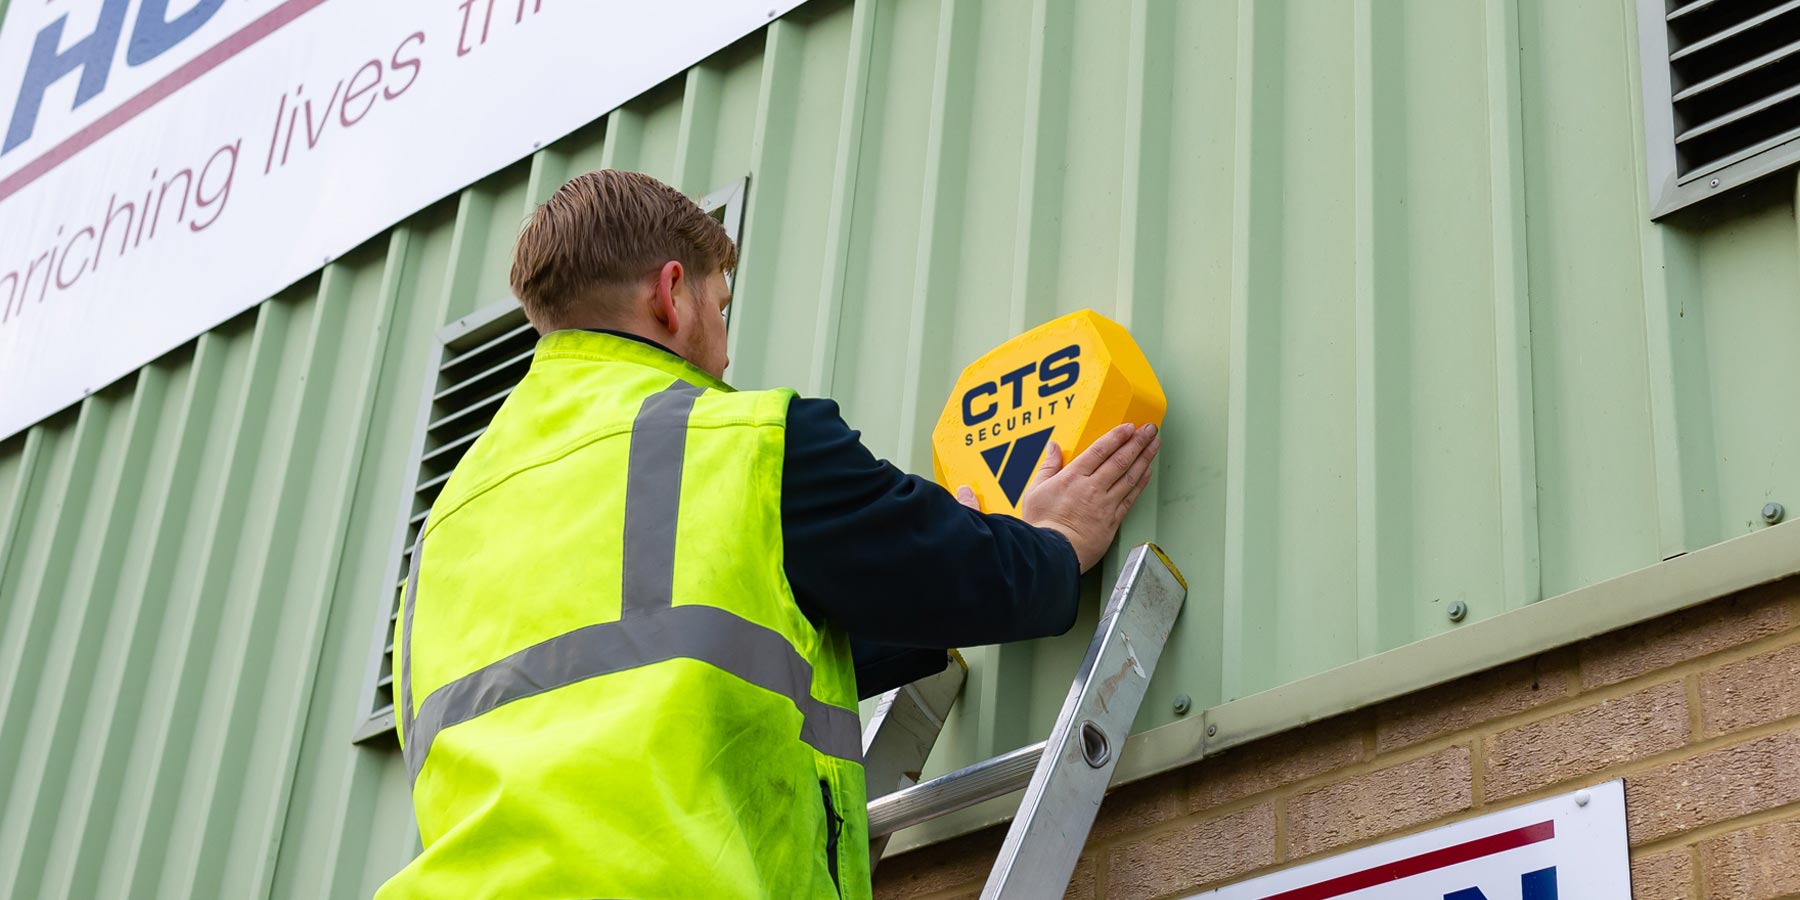 Intruder alarm installation by a CTS Engineer